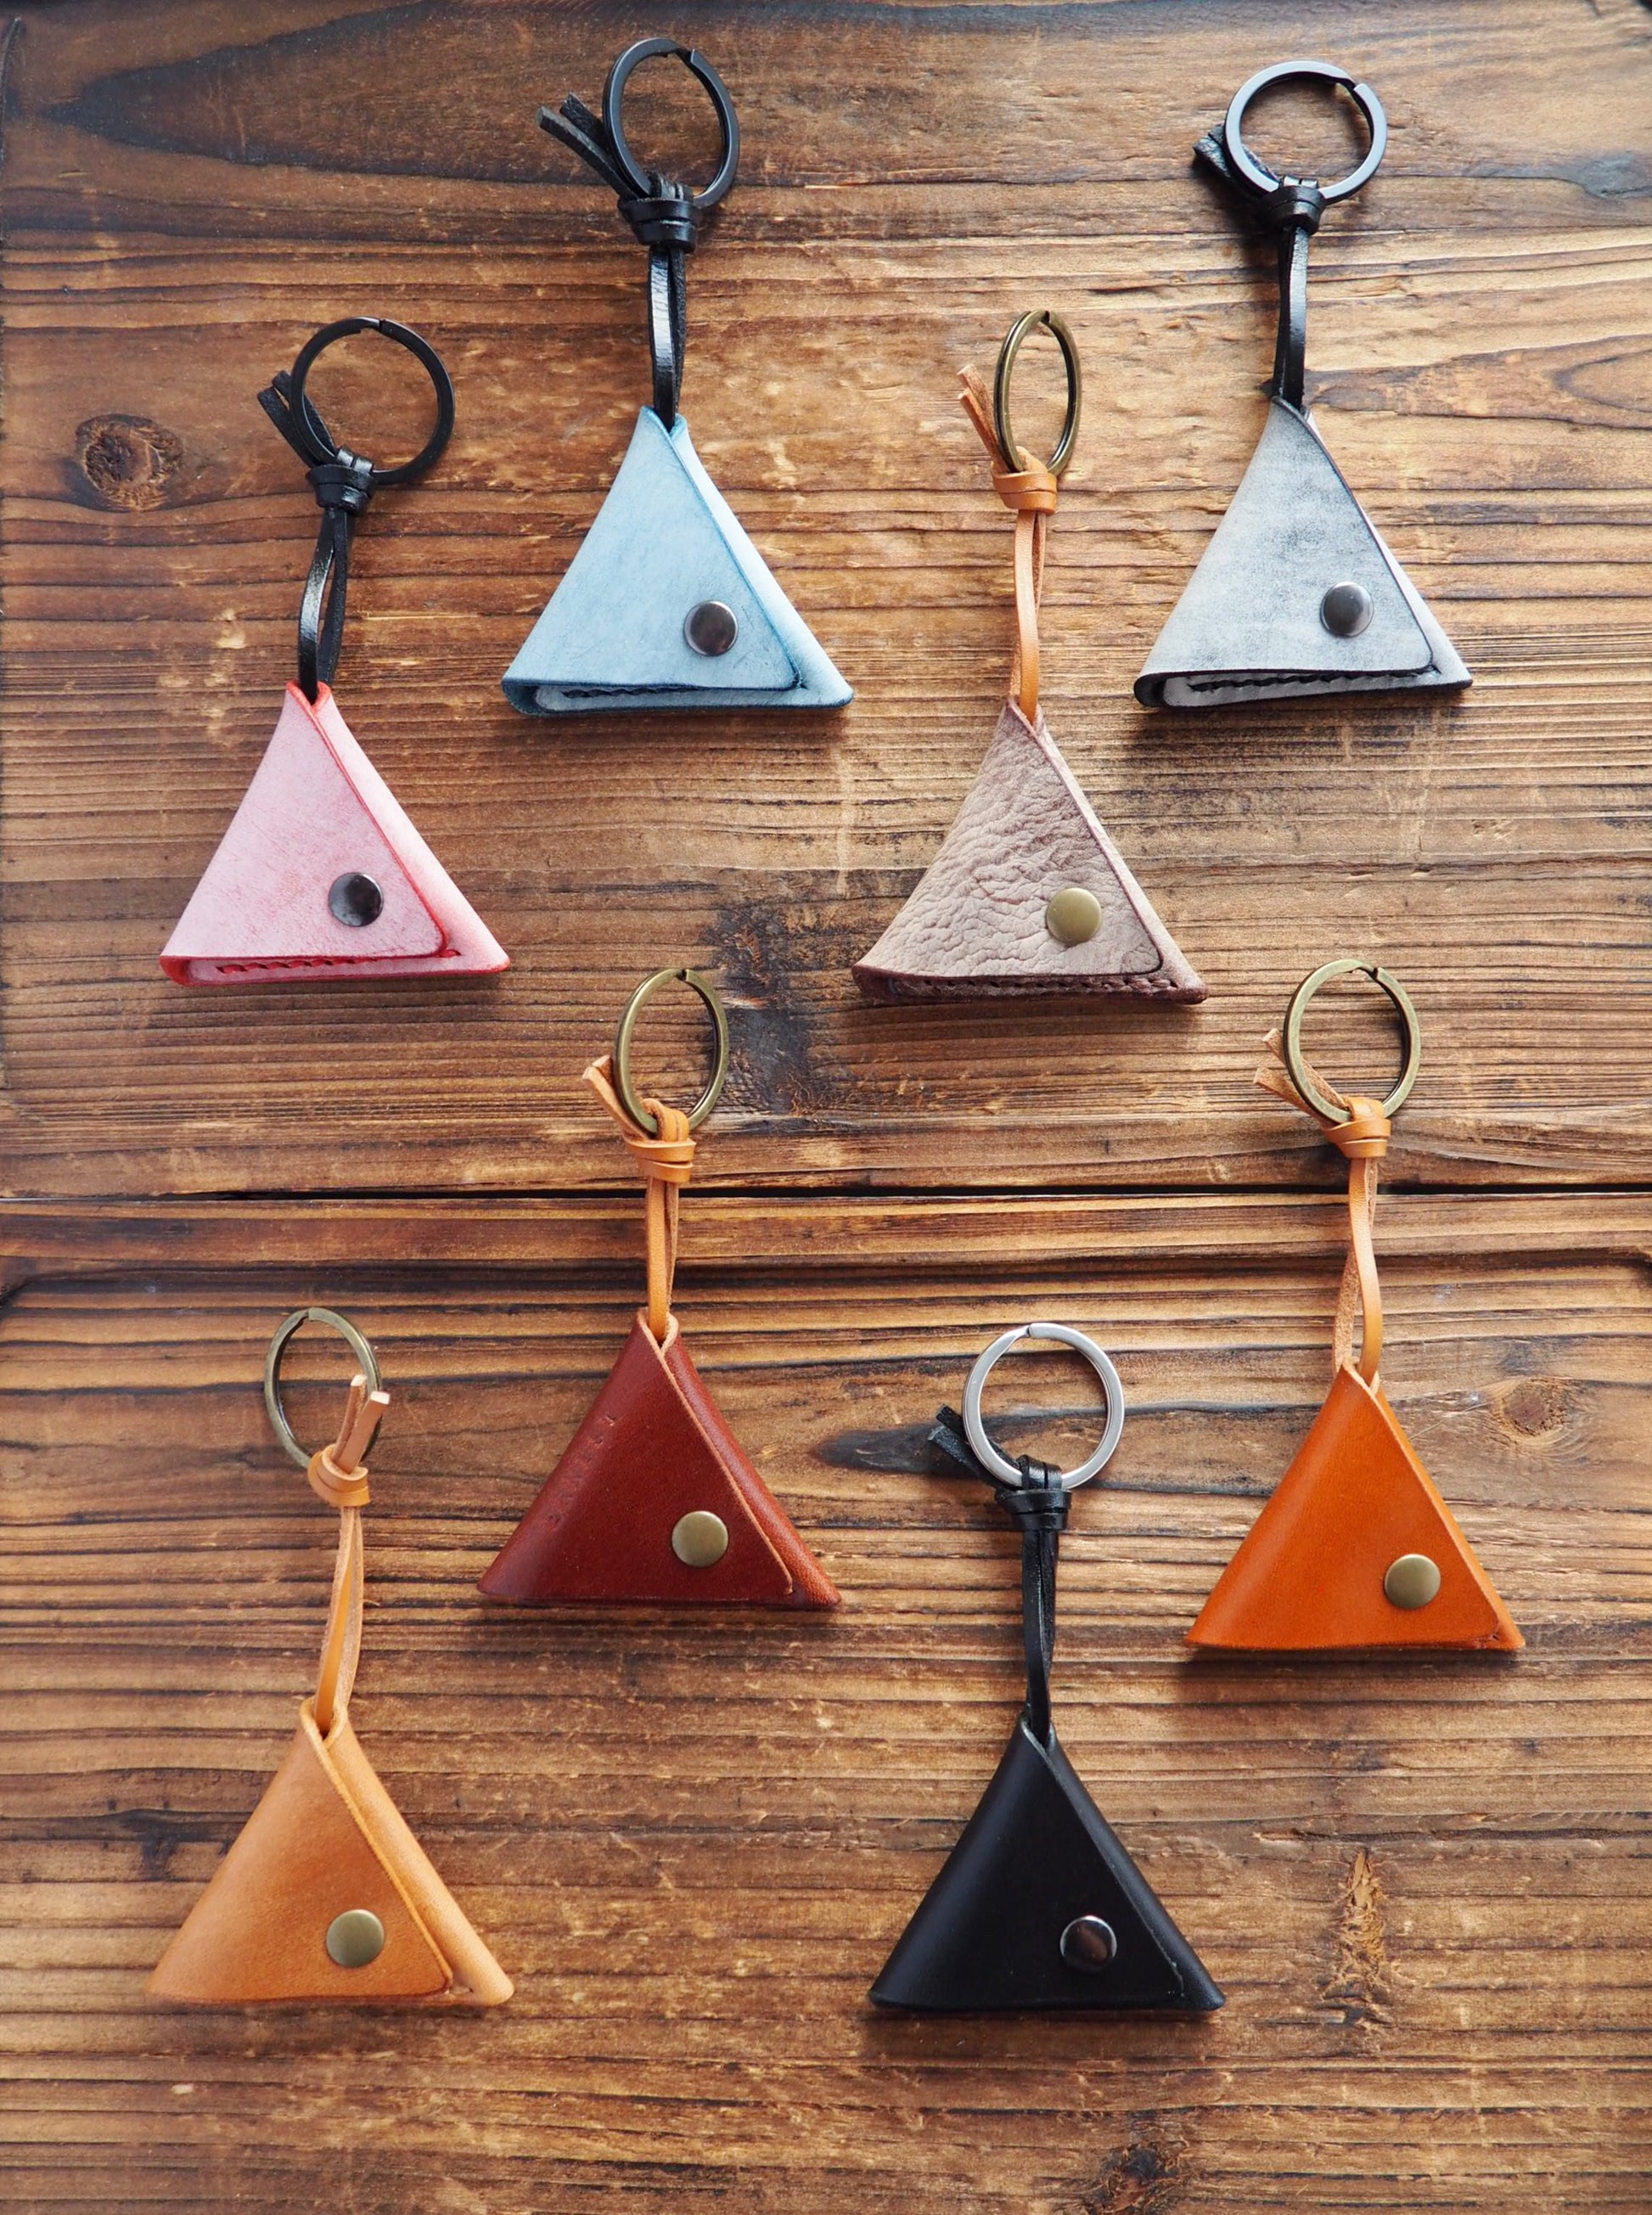 Personalized Leather Folded Guitar Pick Holder Keychain #8 colors available #Ghost Red #Ghost Blue #Ghost Brown #Ghost Black #Brown #Whiskey Brown #Black #Honey Brown | Handmade Leather Goods | Personalized Gifts | ES Corner